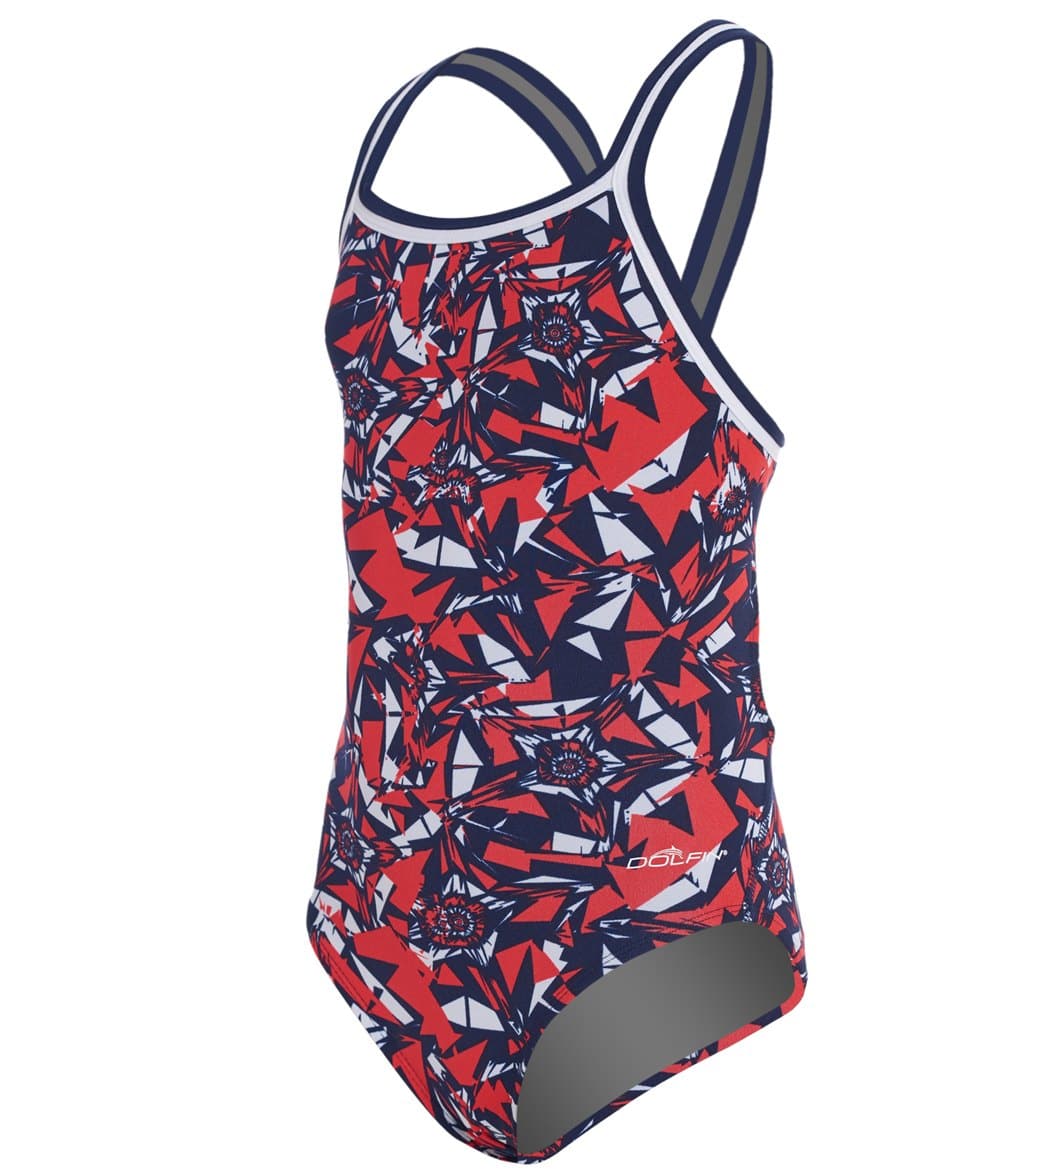 Dolfin Girls' Reliance Ion Dbx V-Back One Piece Swimsuit - Red/White/Blue 22 Polyester - Swimoutlet.com